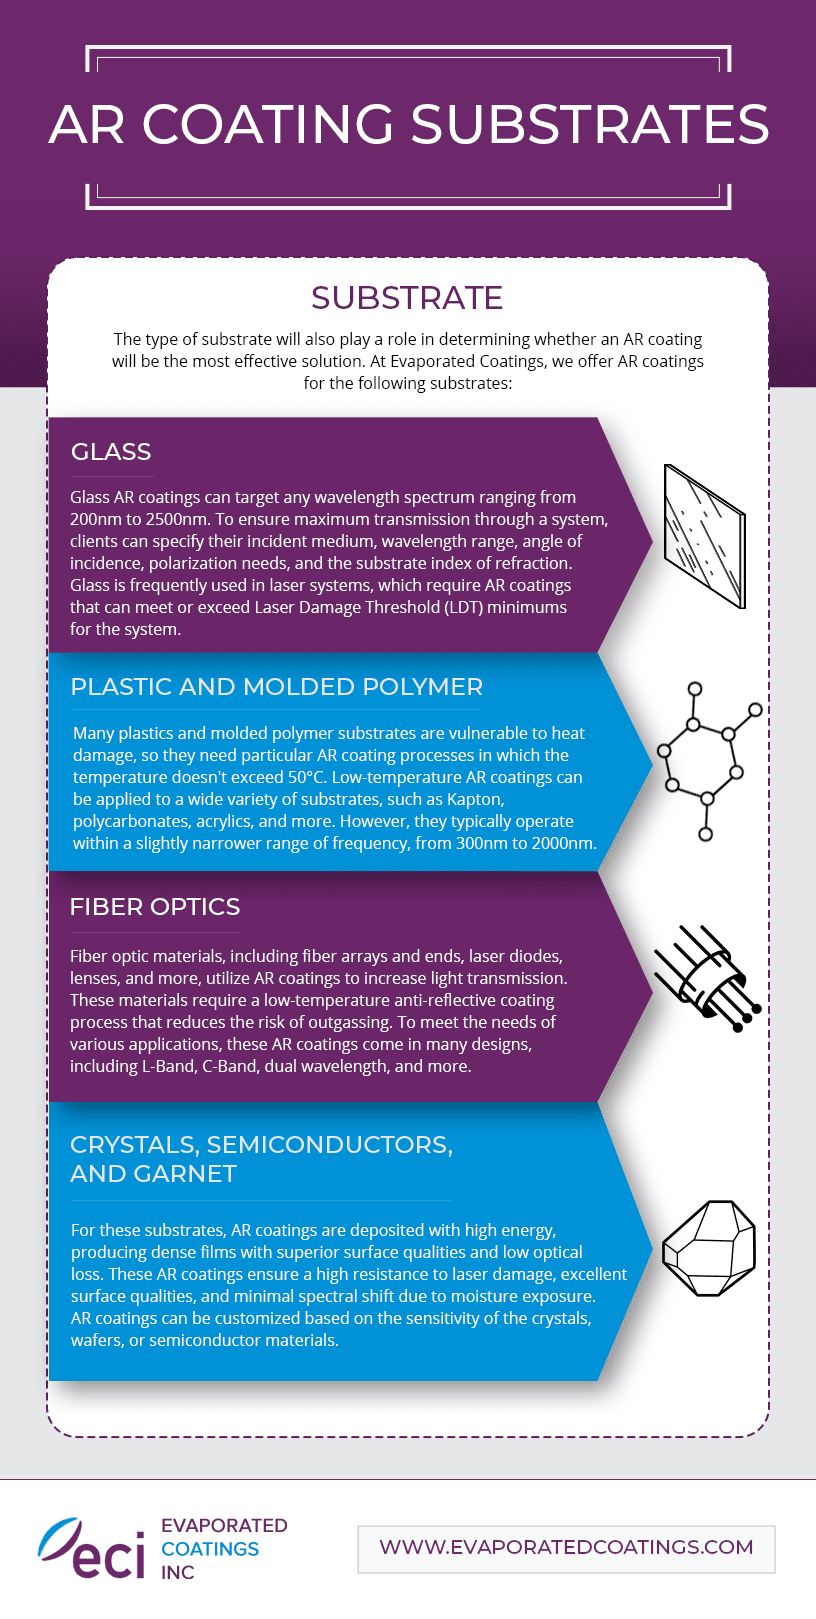 AR Coating Substrates infographic